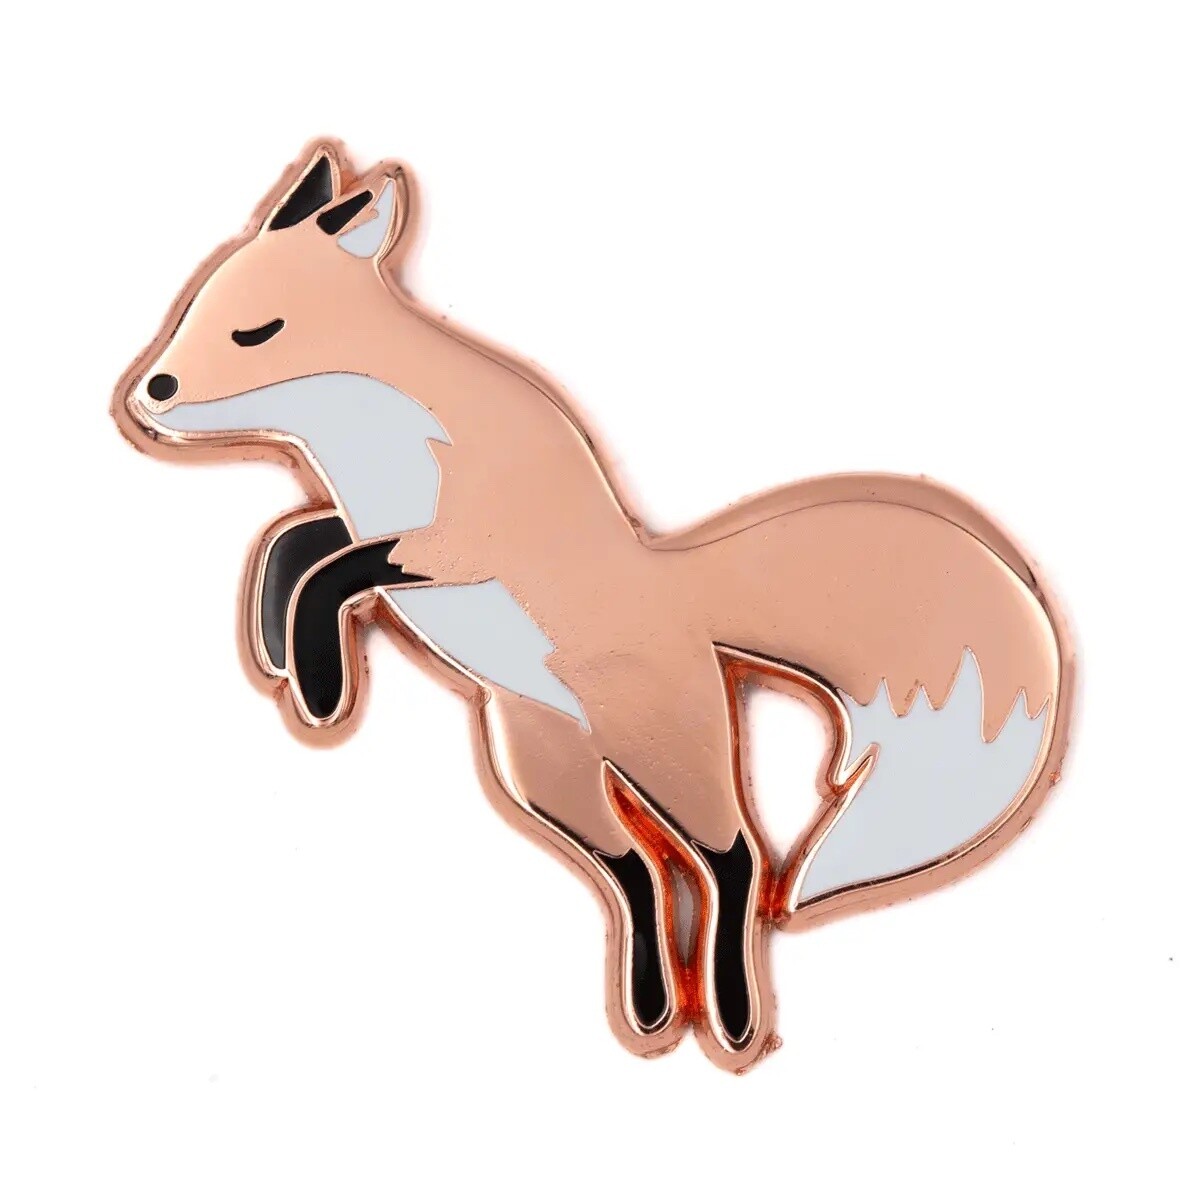 Jumping Fox - Enamel Pin by These Are Things